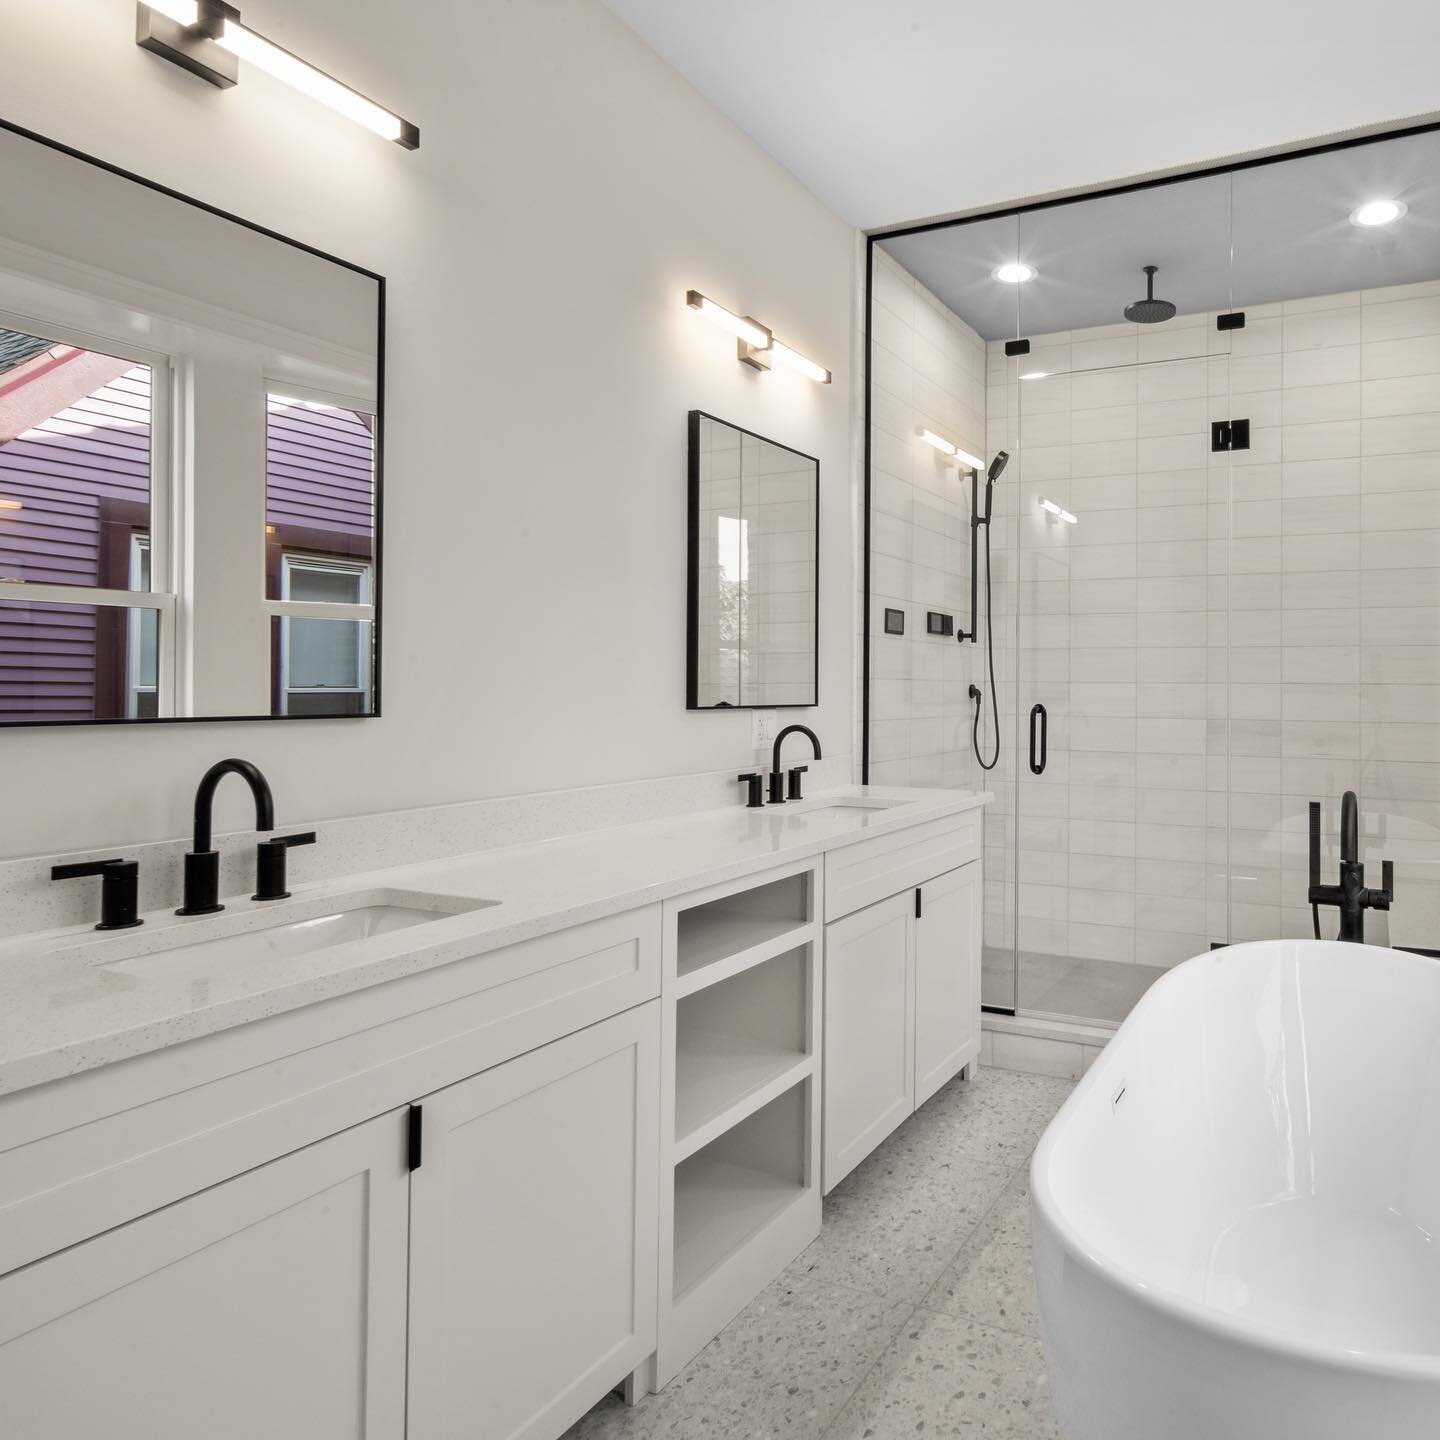 Become refreshed and rejuvenated through this stunning bathroom makeover. 
.
.
.
#bathroomremodel #thurdayvibes #chicagoflip #chicagoarchitect #pavlovcikarchitecture